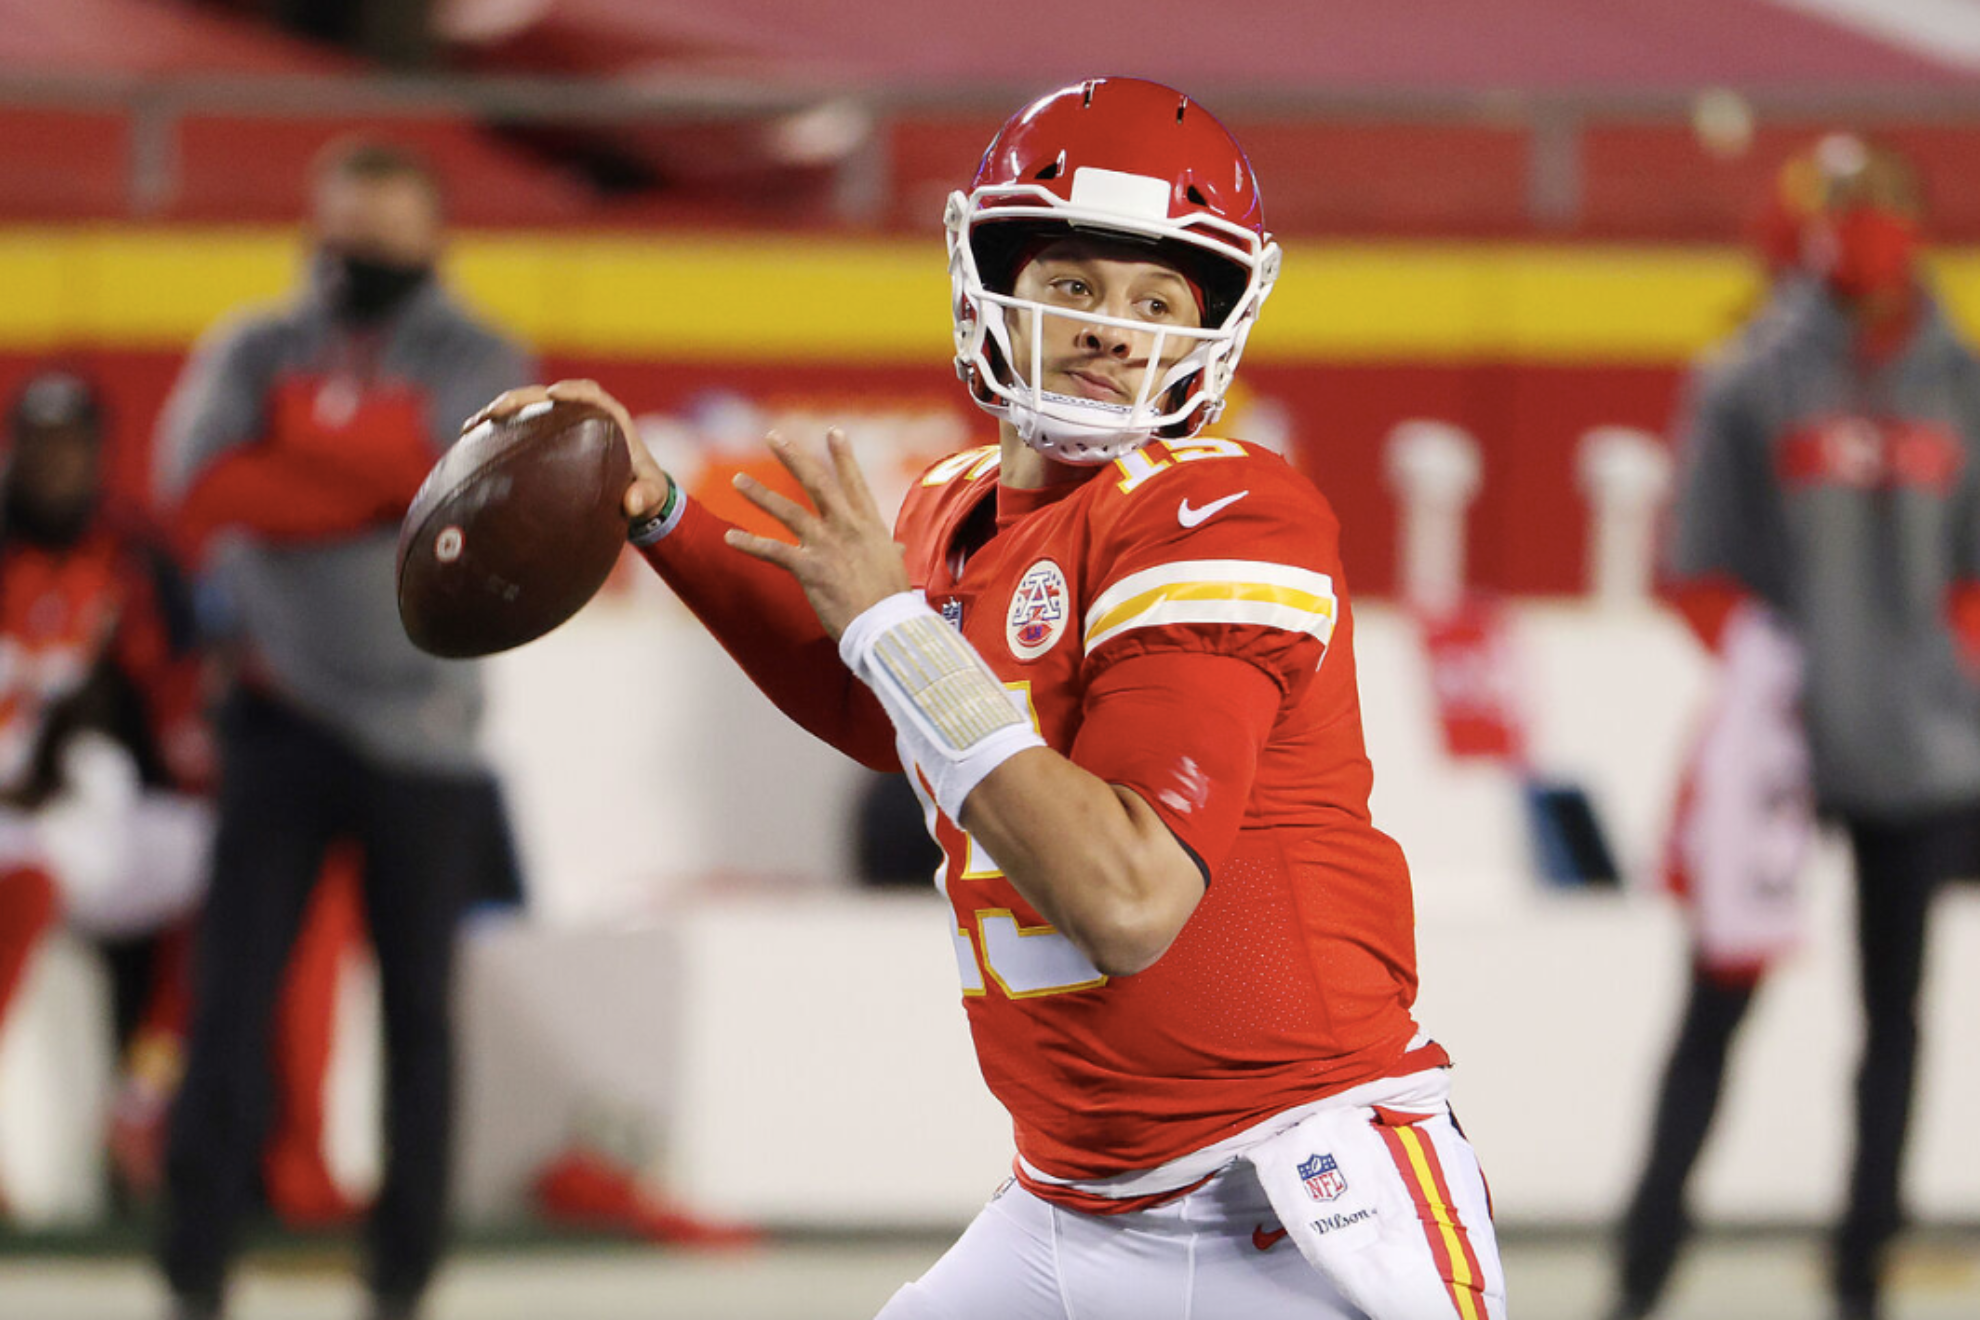 NFL fans slam Patrick Mahomes over restructured contract remarks